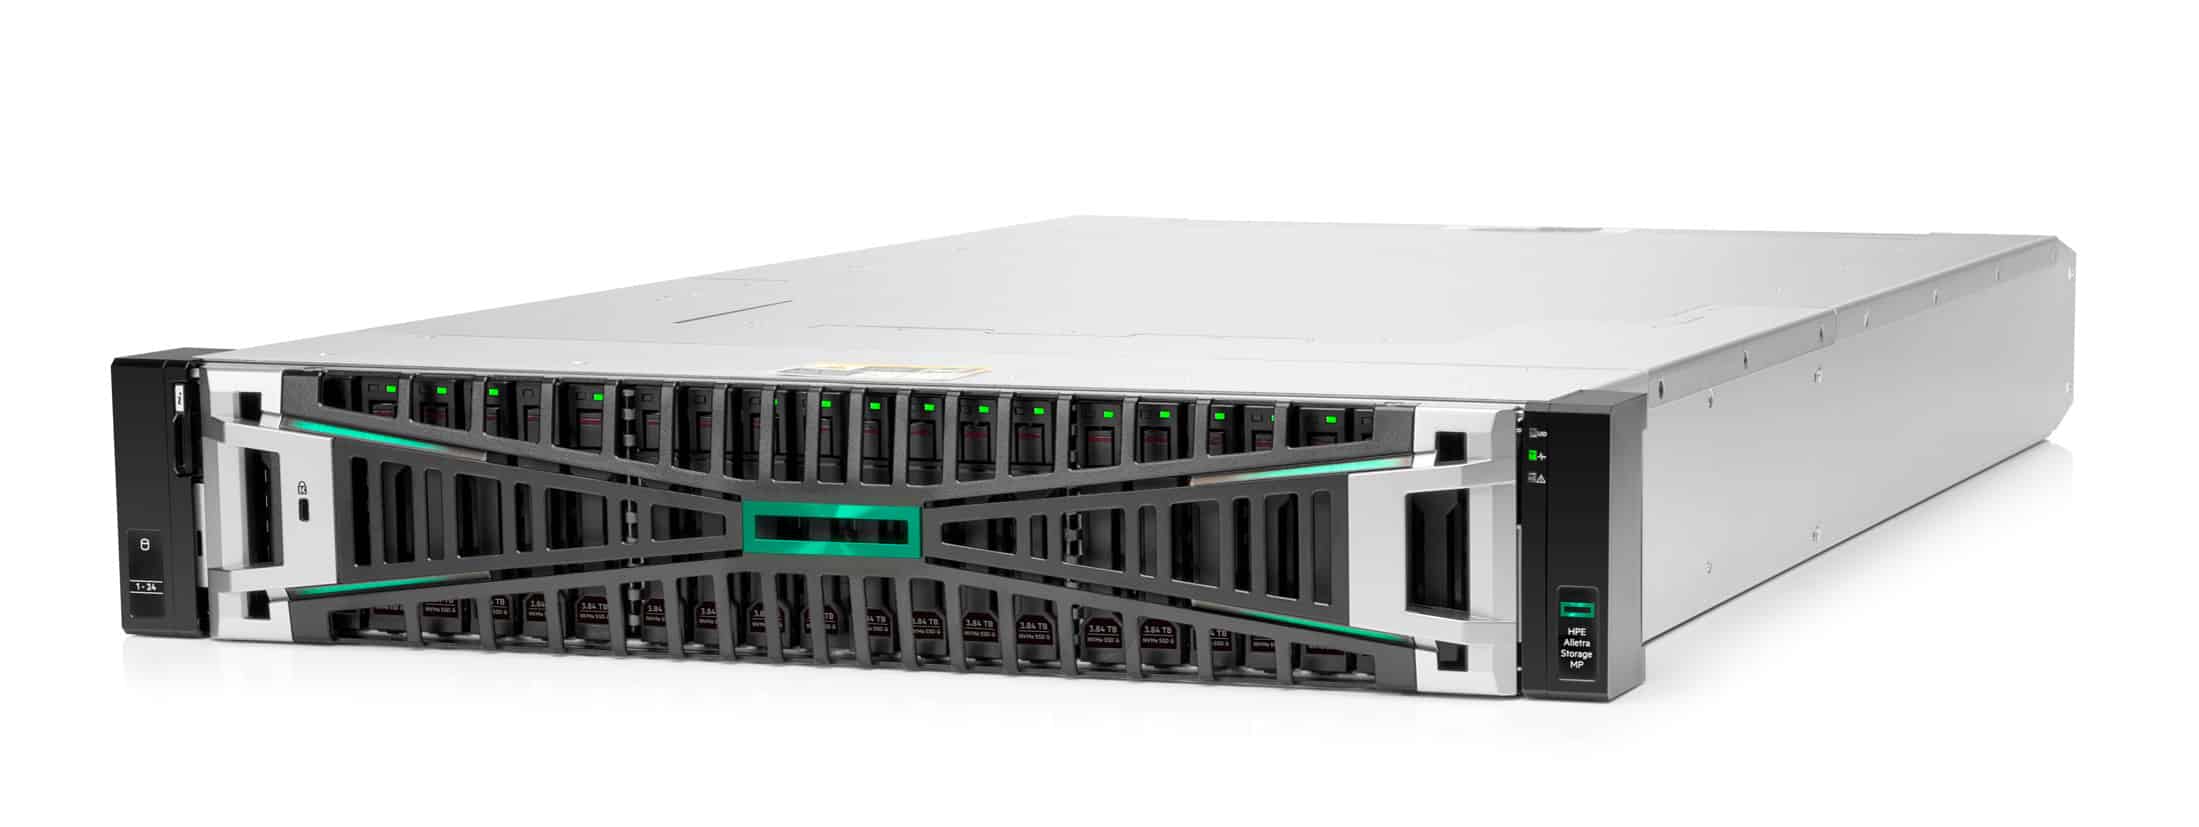 HPE brings GreenLake cloud experience to on-prem block and file storage - Techzine Europe